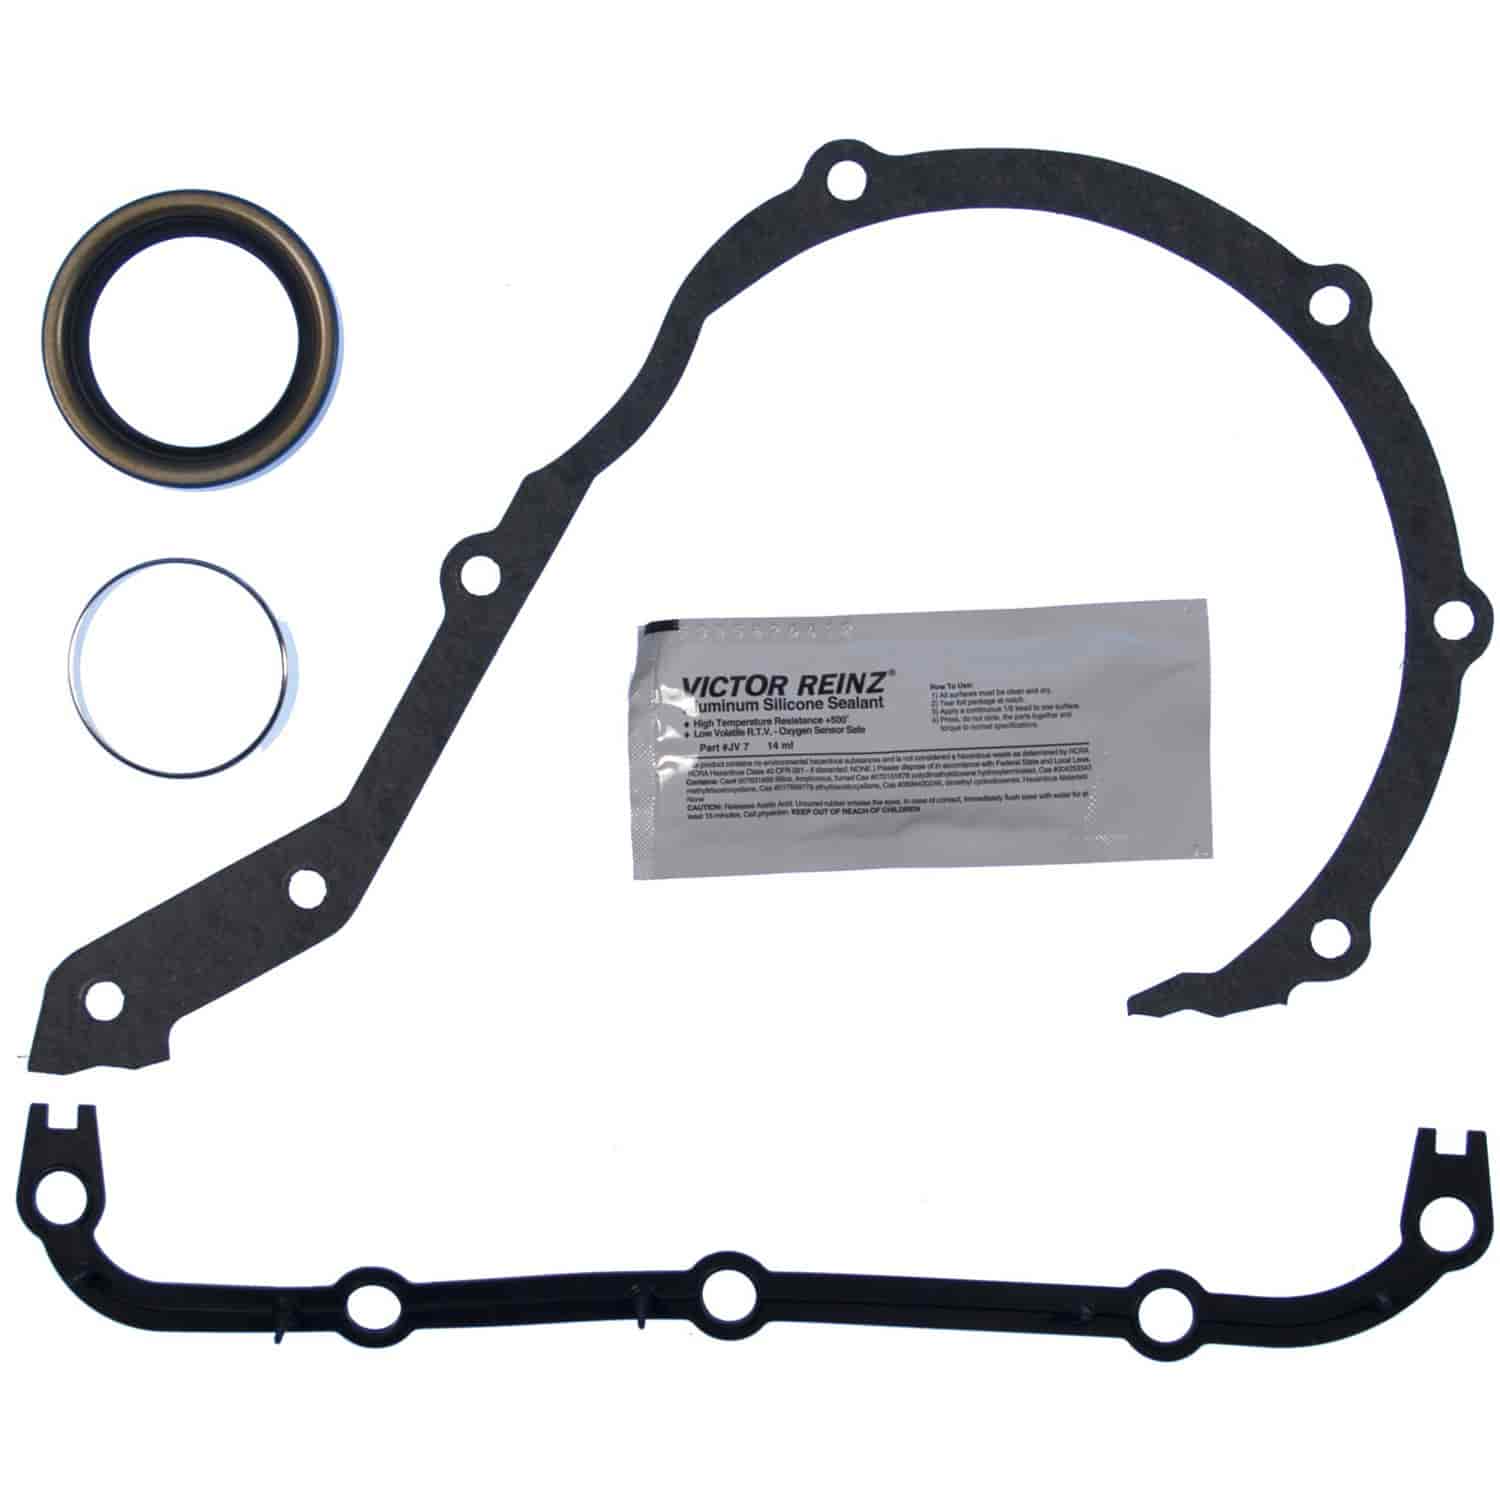 Timing Cover Set Ford-Pass Trk&Ind 240 300 65-94  Contains Repair Sleeve Option To JV867